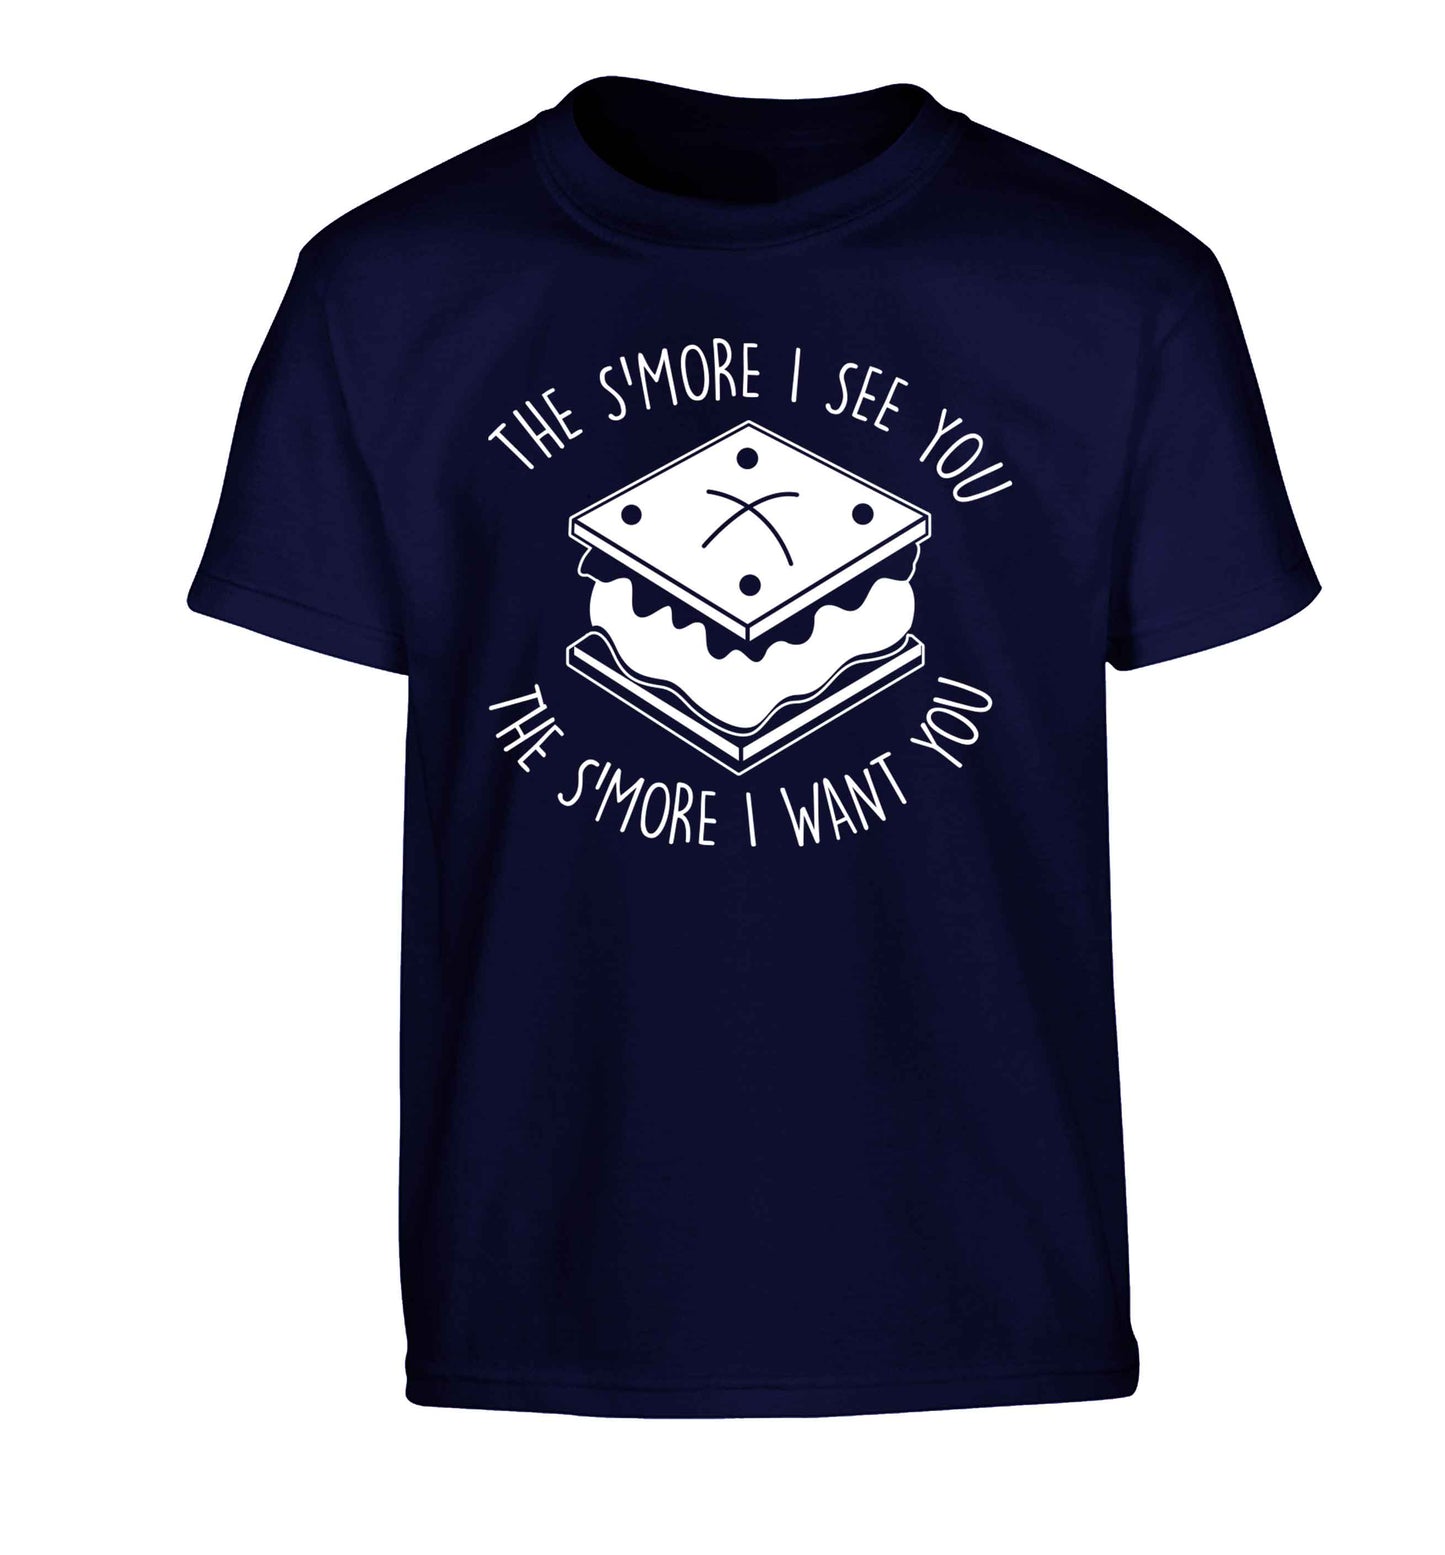 The s'more I see you the s'more I want you Children's navy Tshirt 12-13 Years